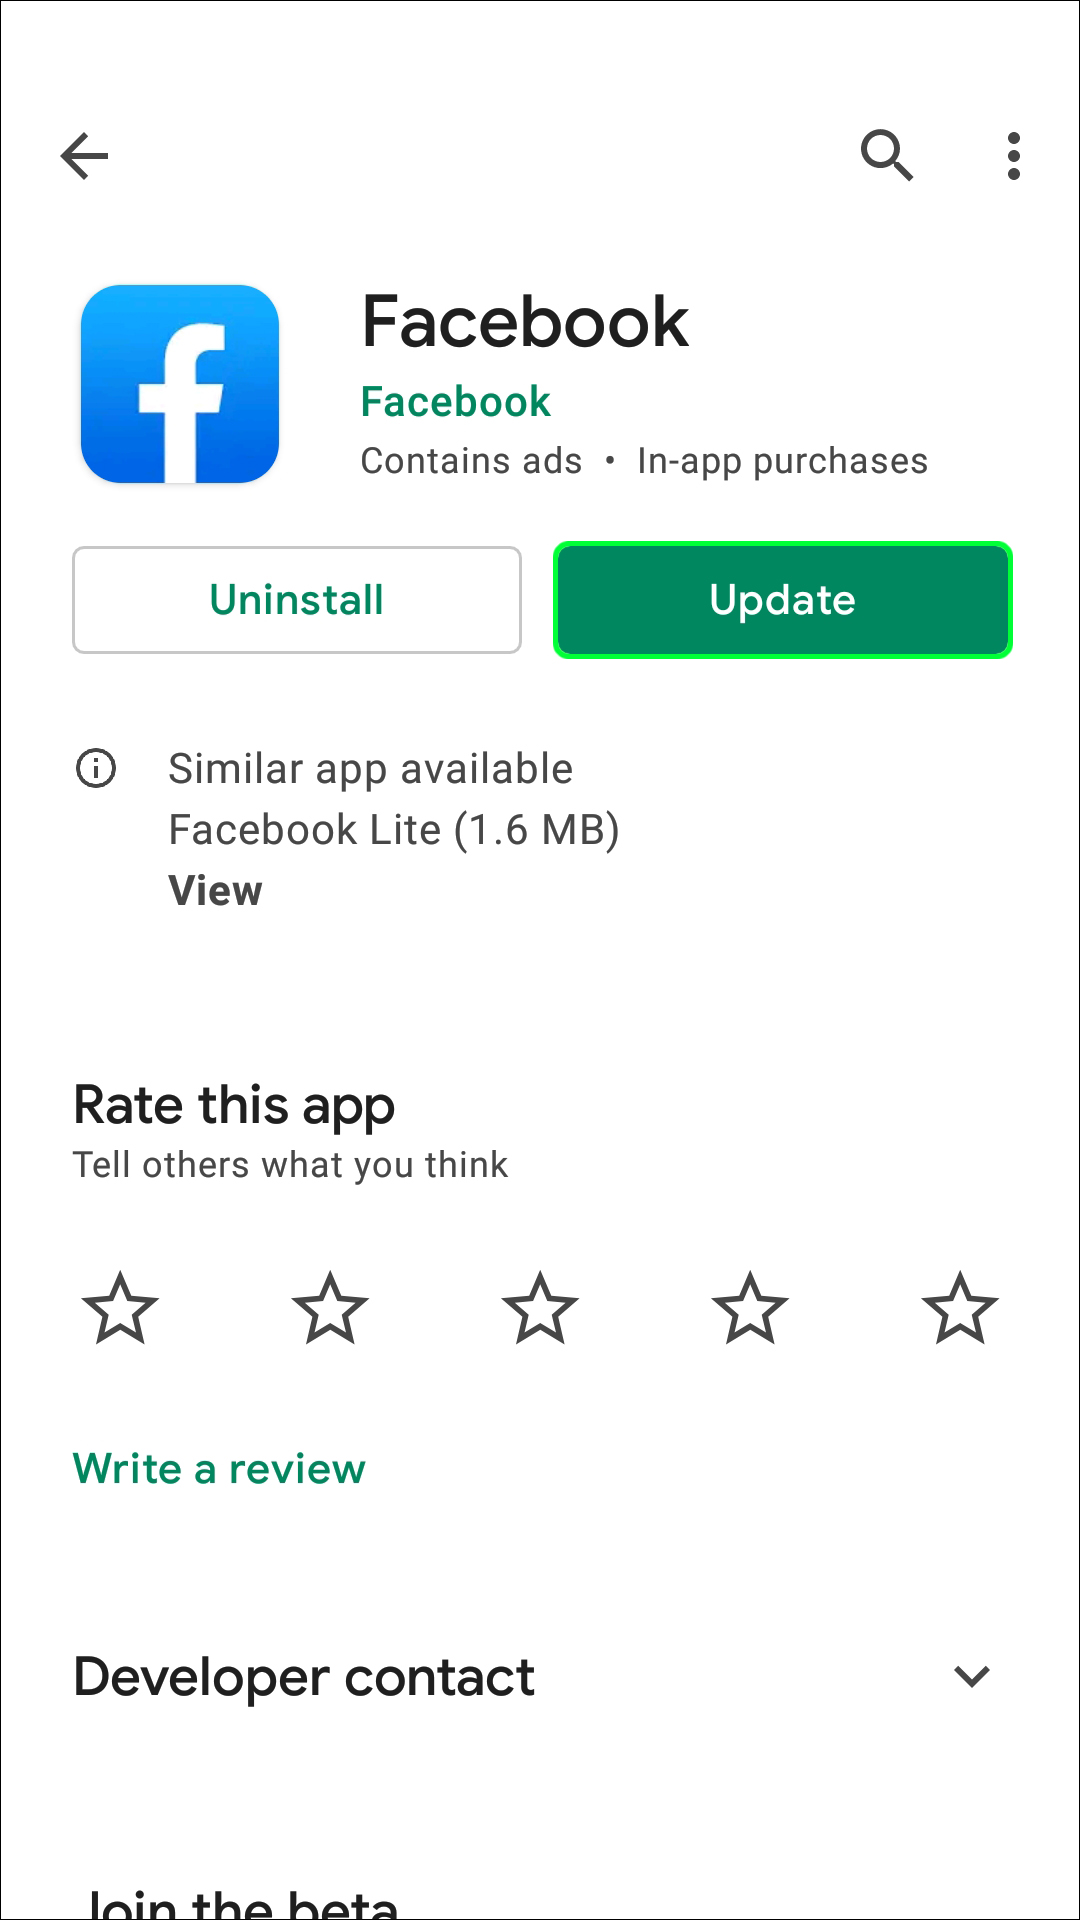 Open the app store or Google Play Store
Search for "Facebook"